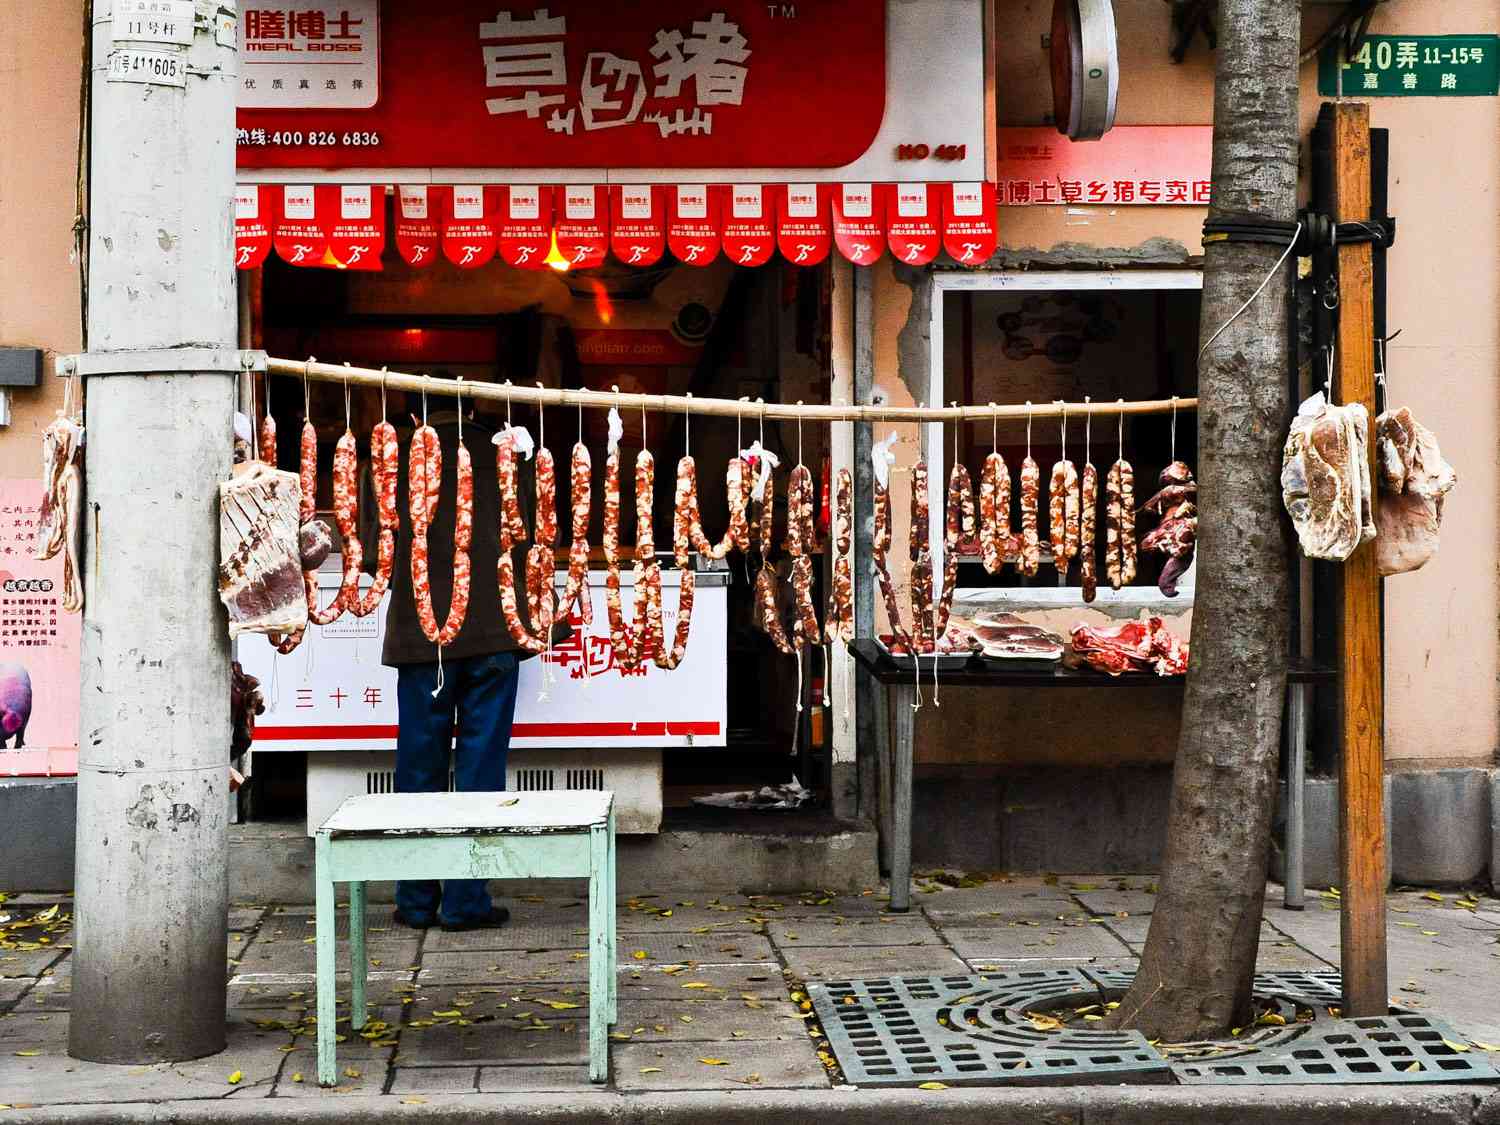 20170116-chinese-new-year-2017--dried-sausage-reilly.jpg